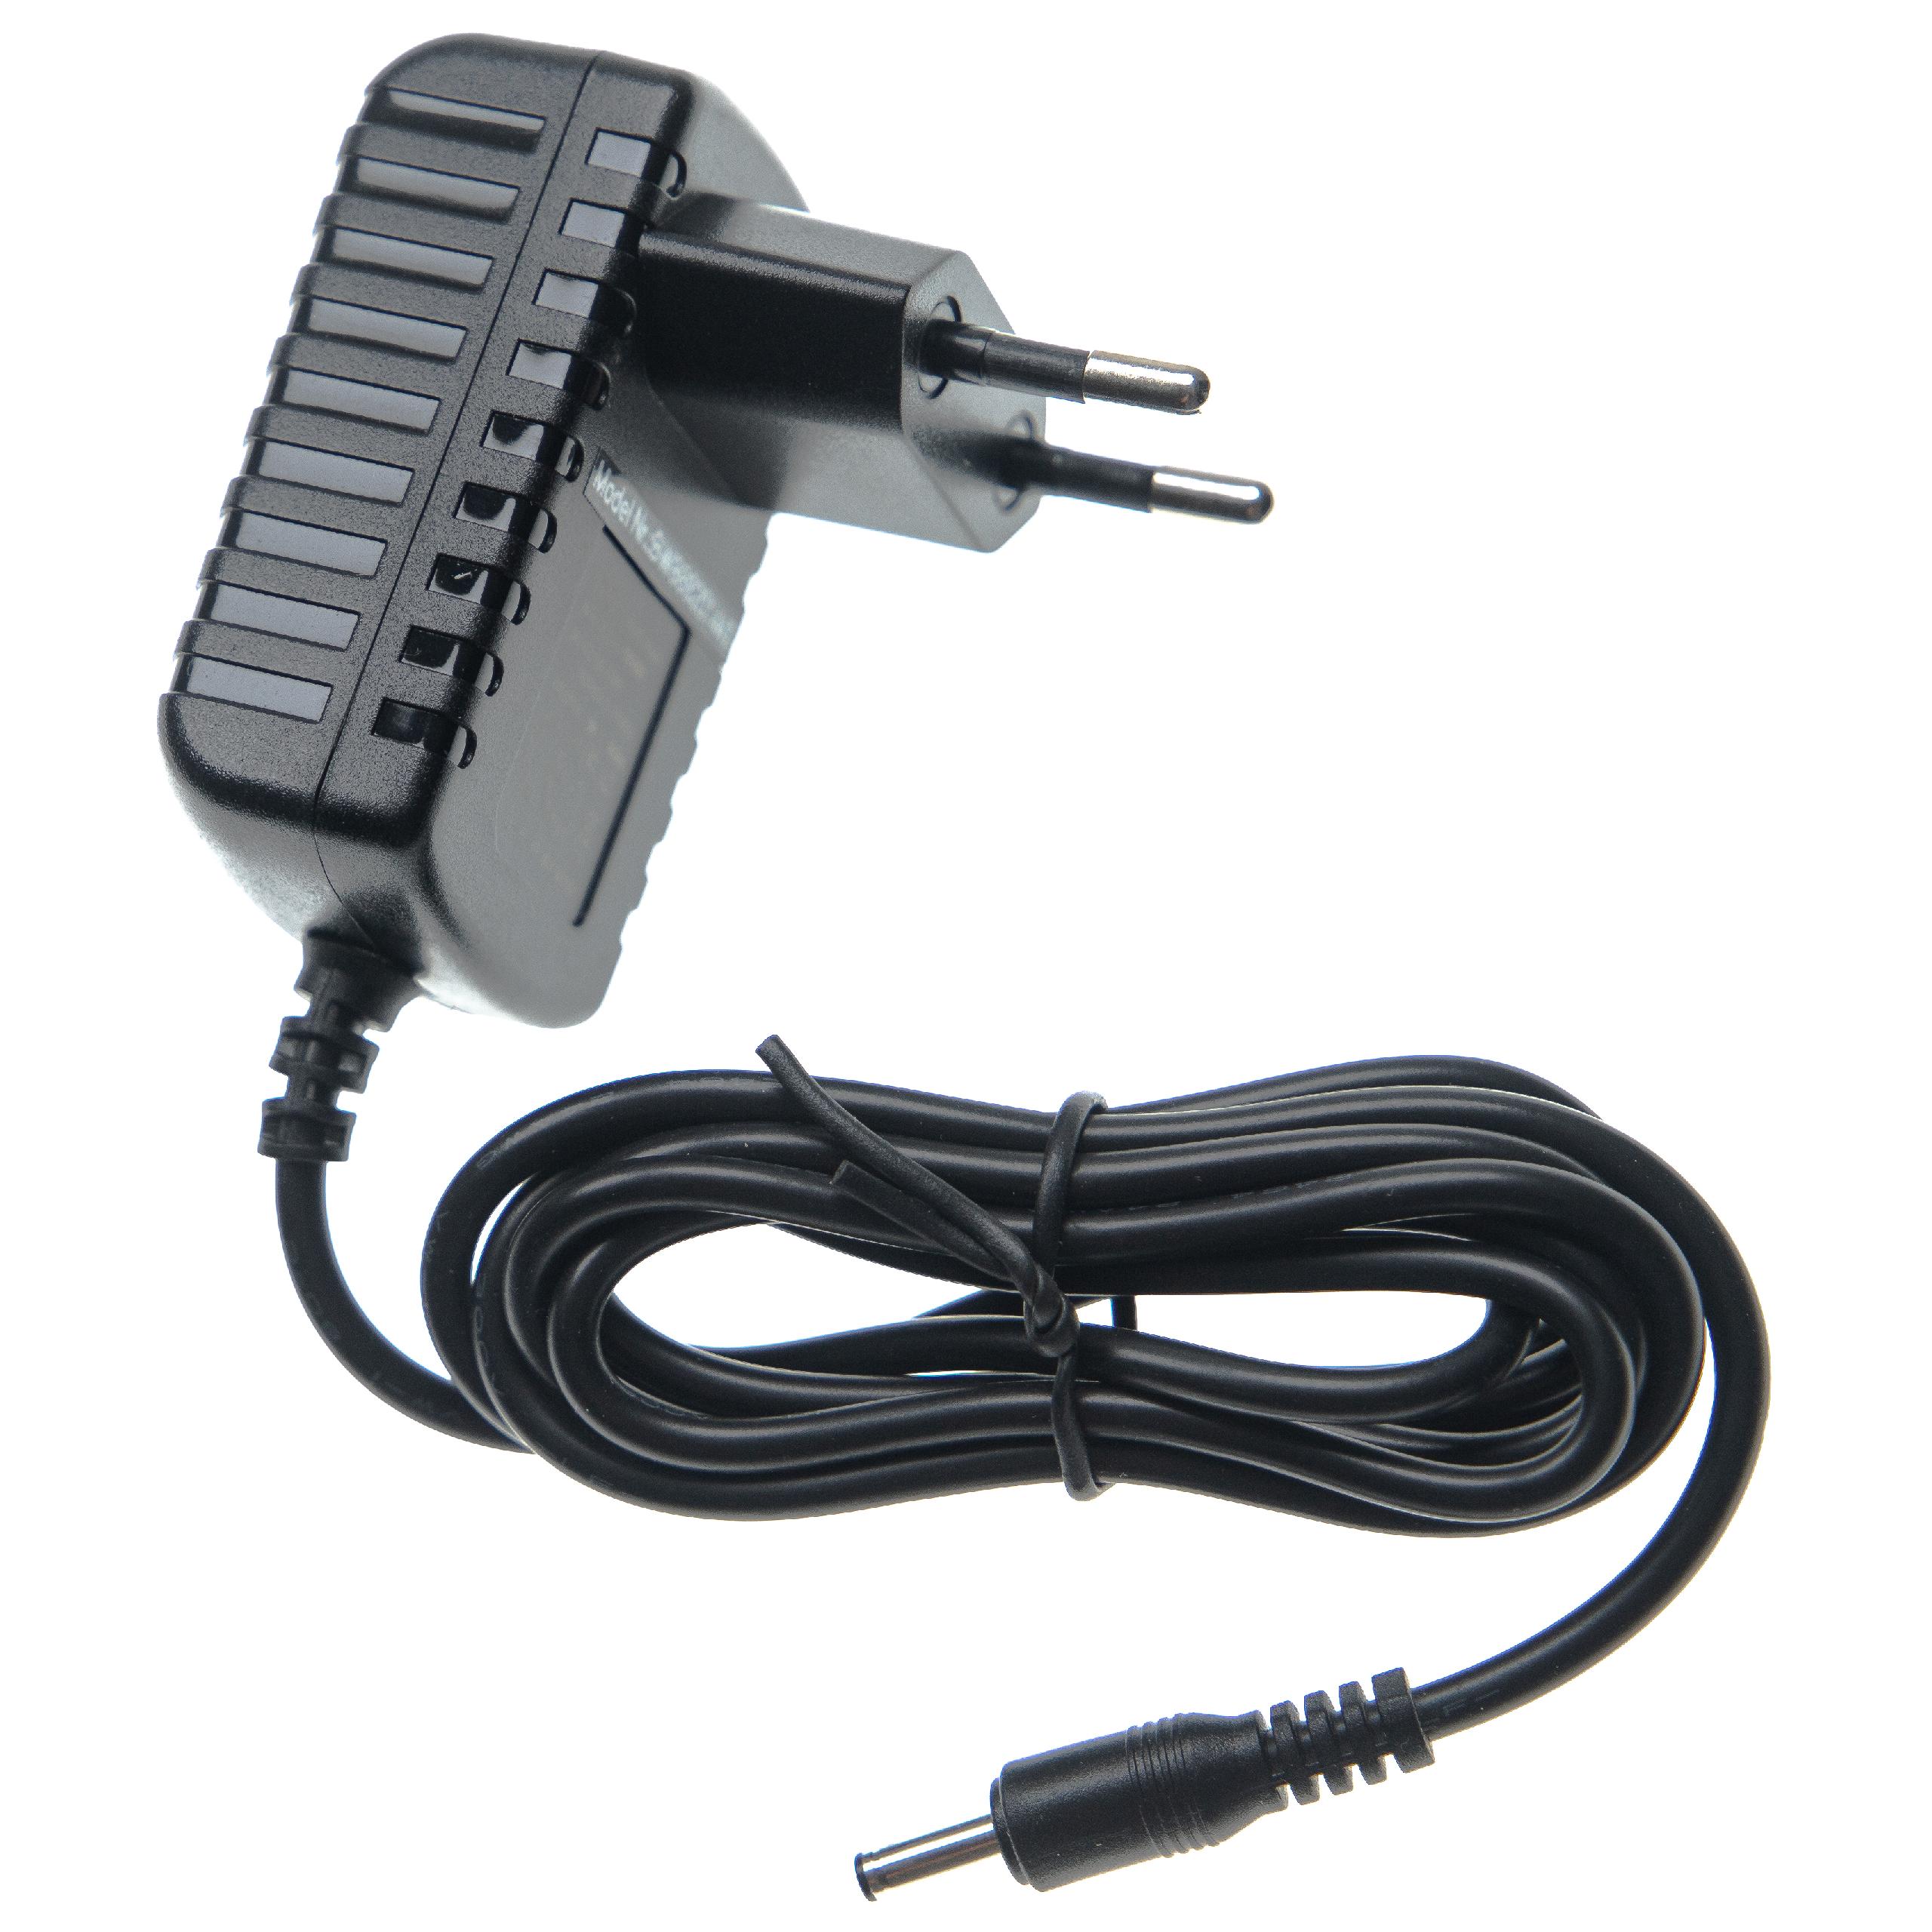 Mains Power Adapter replaces Compex 683020 for Compex Muscle Stimulator, Electro-Stimulator - 140 cm